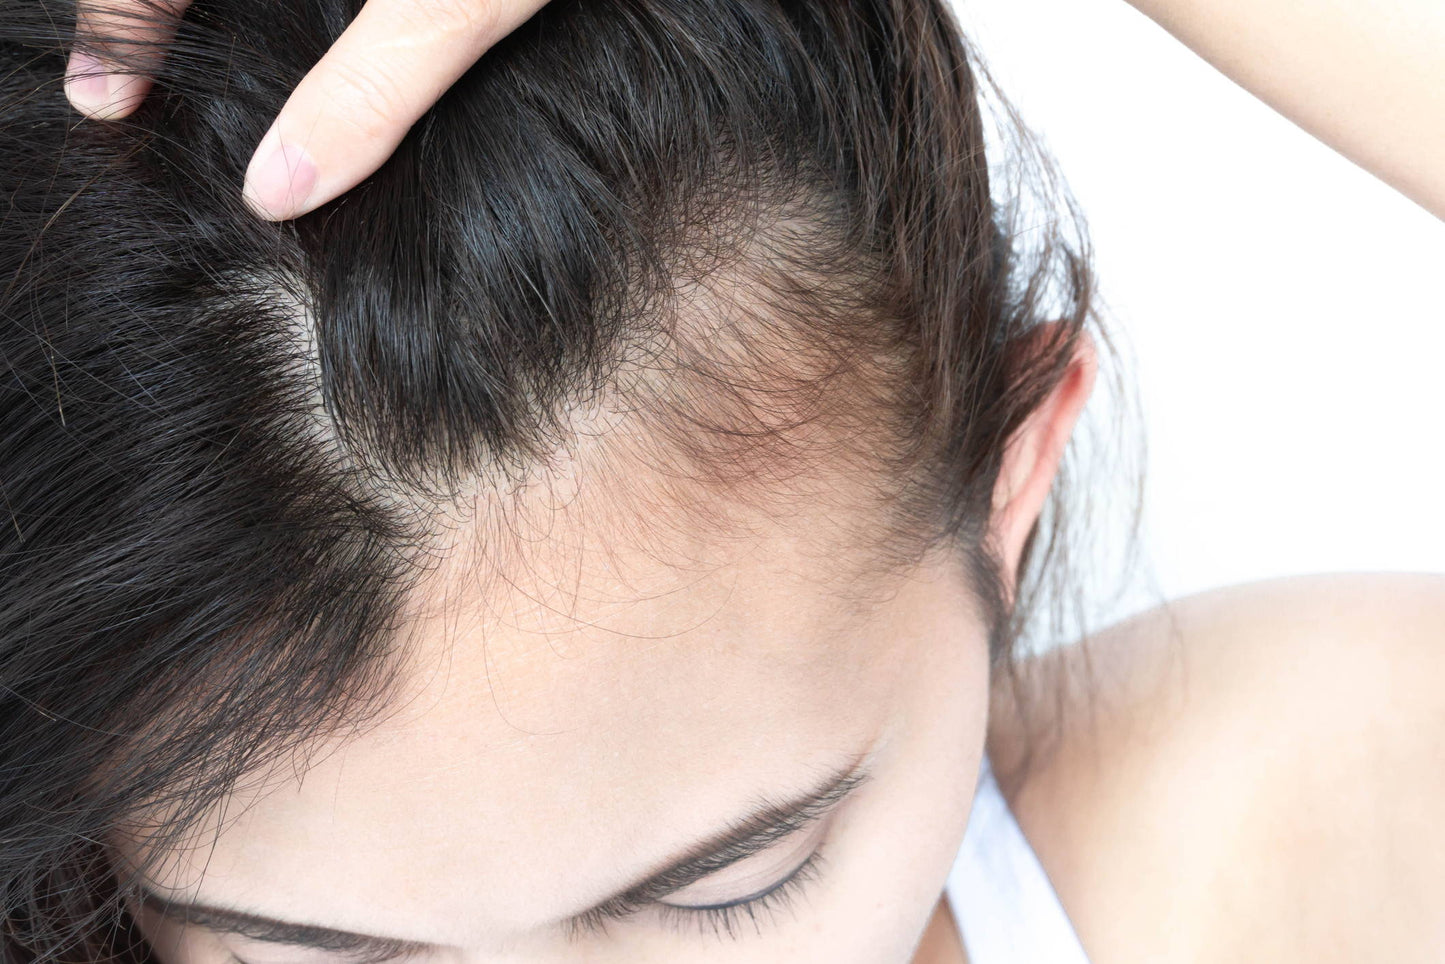 Can Lupus Cause Hair Loss?